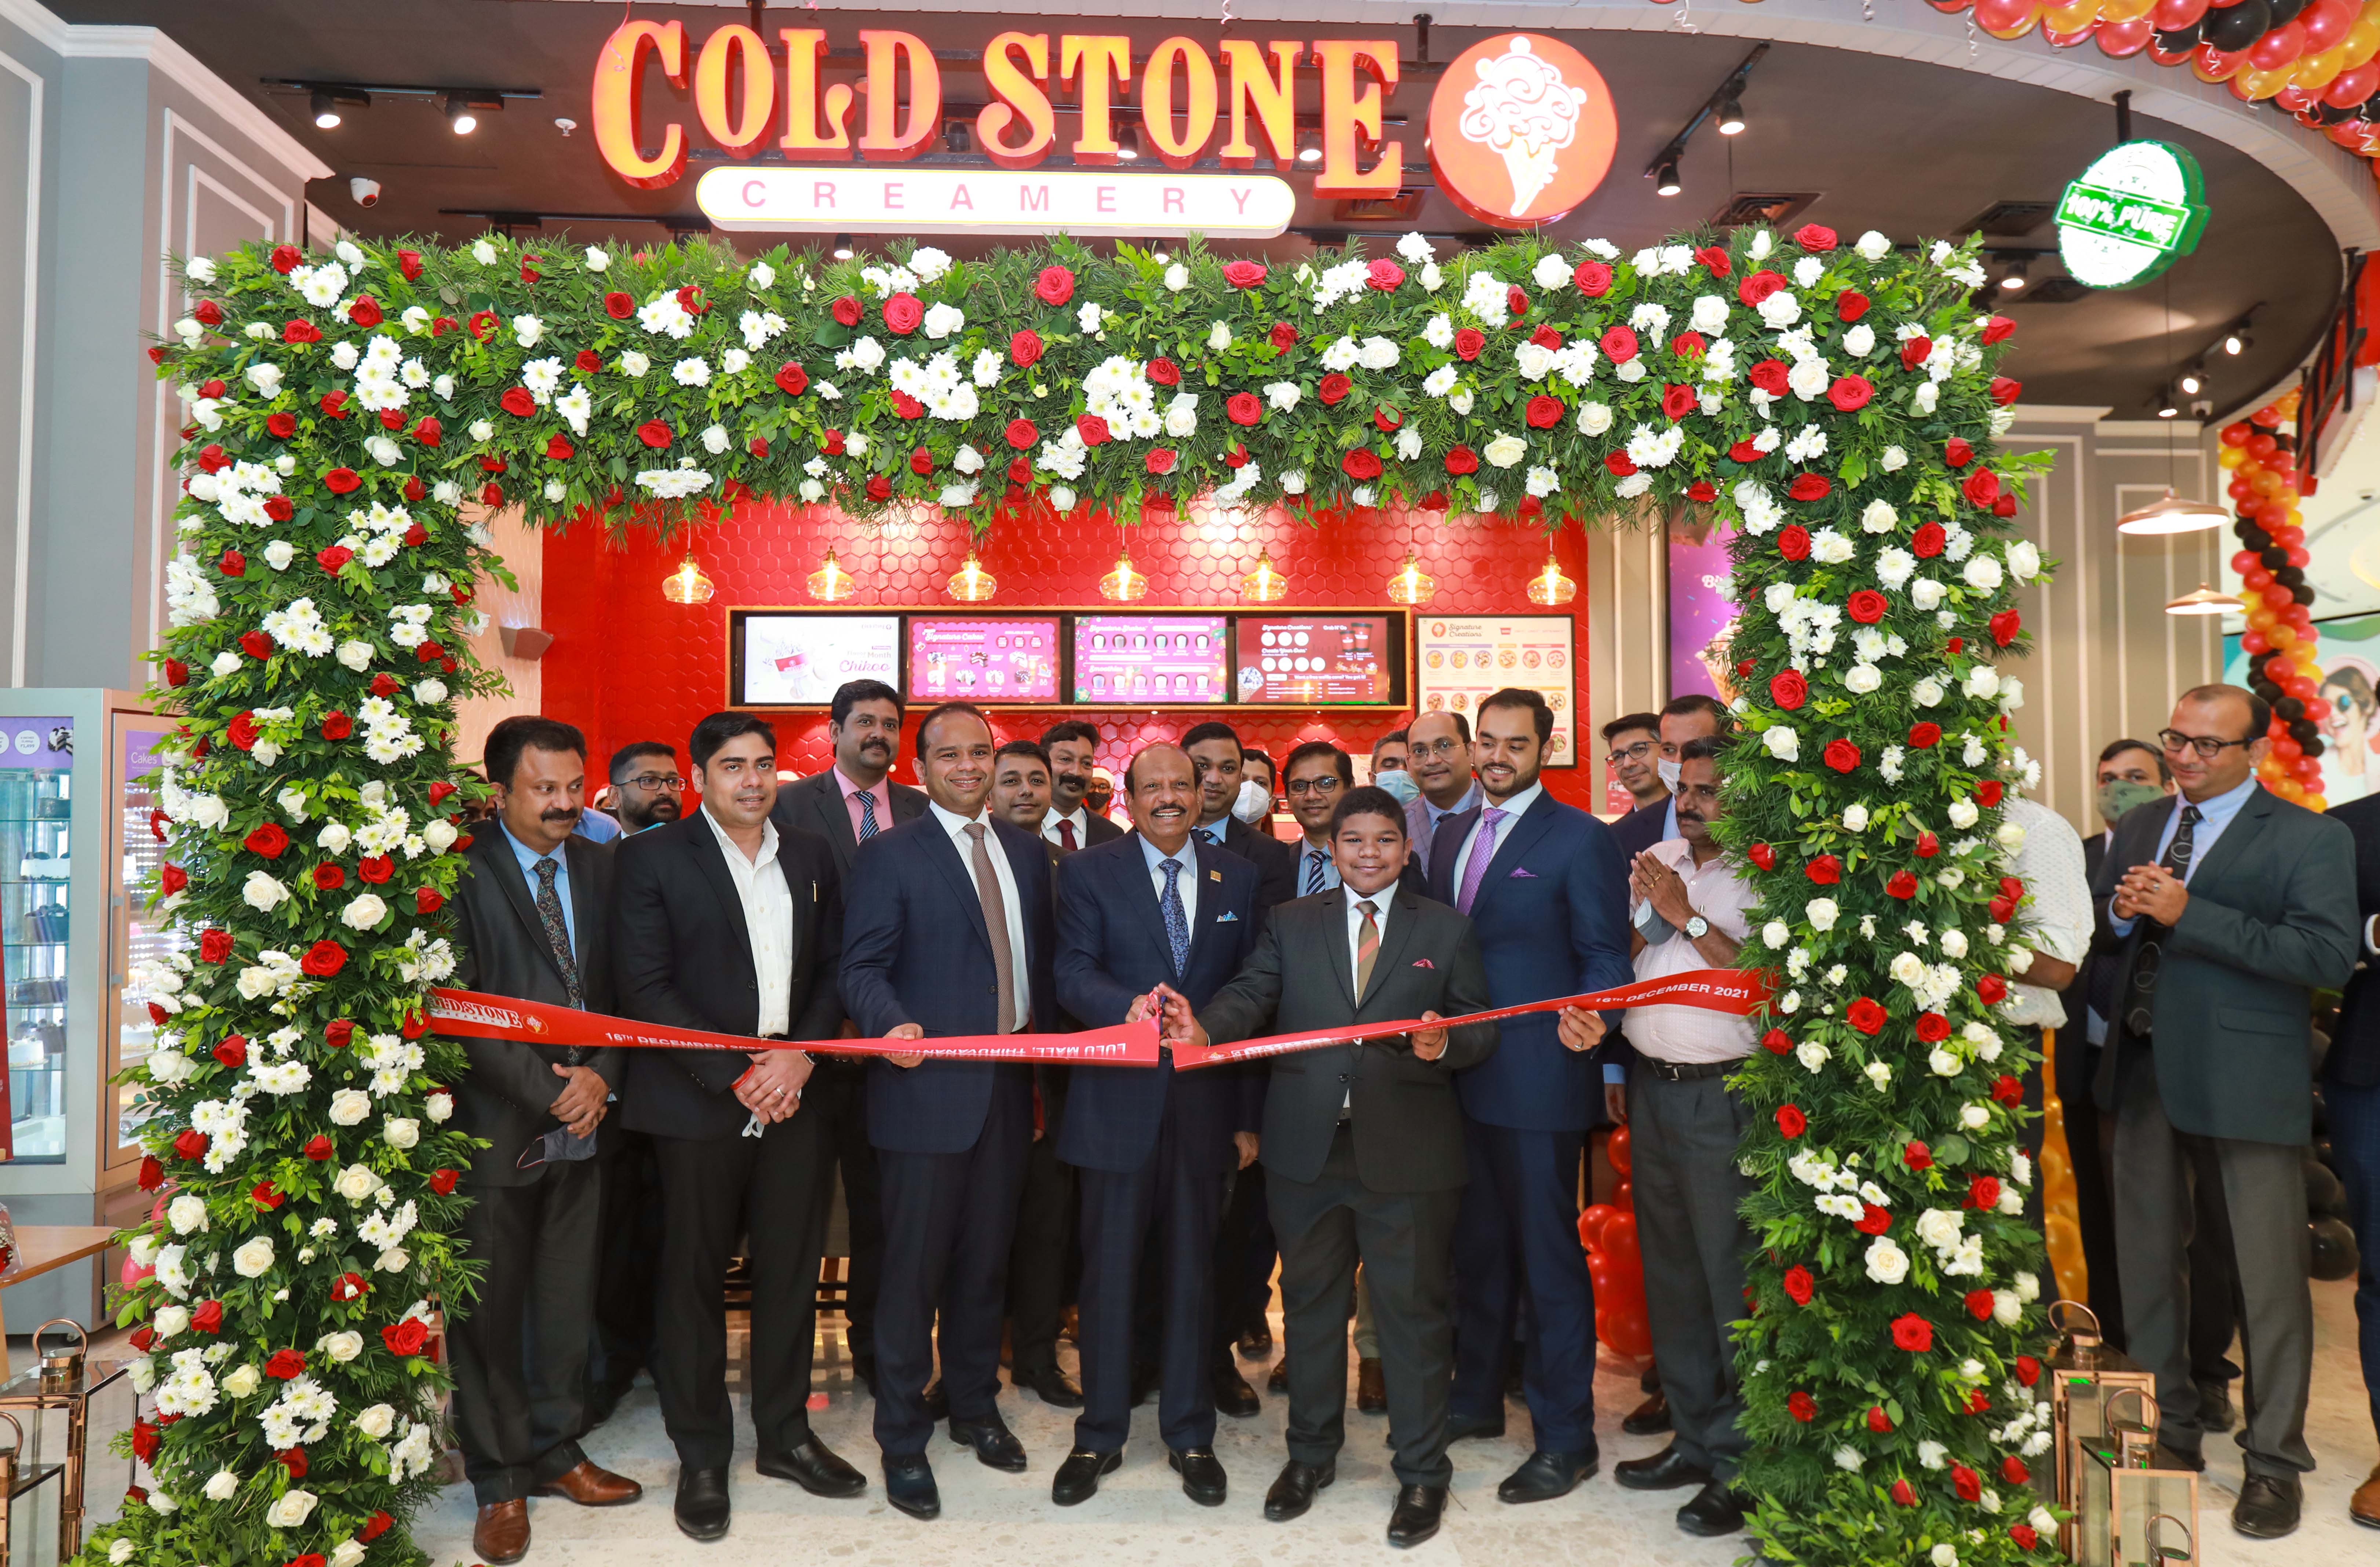 Cold Stone Creamery, the American iconic ice cream brand enters the capital city of Kerala